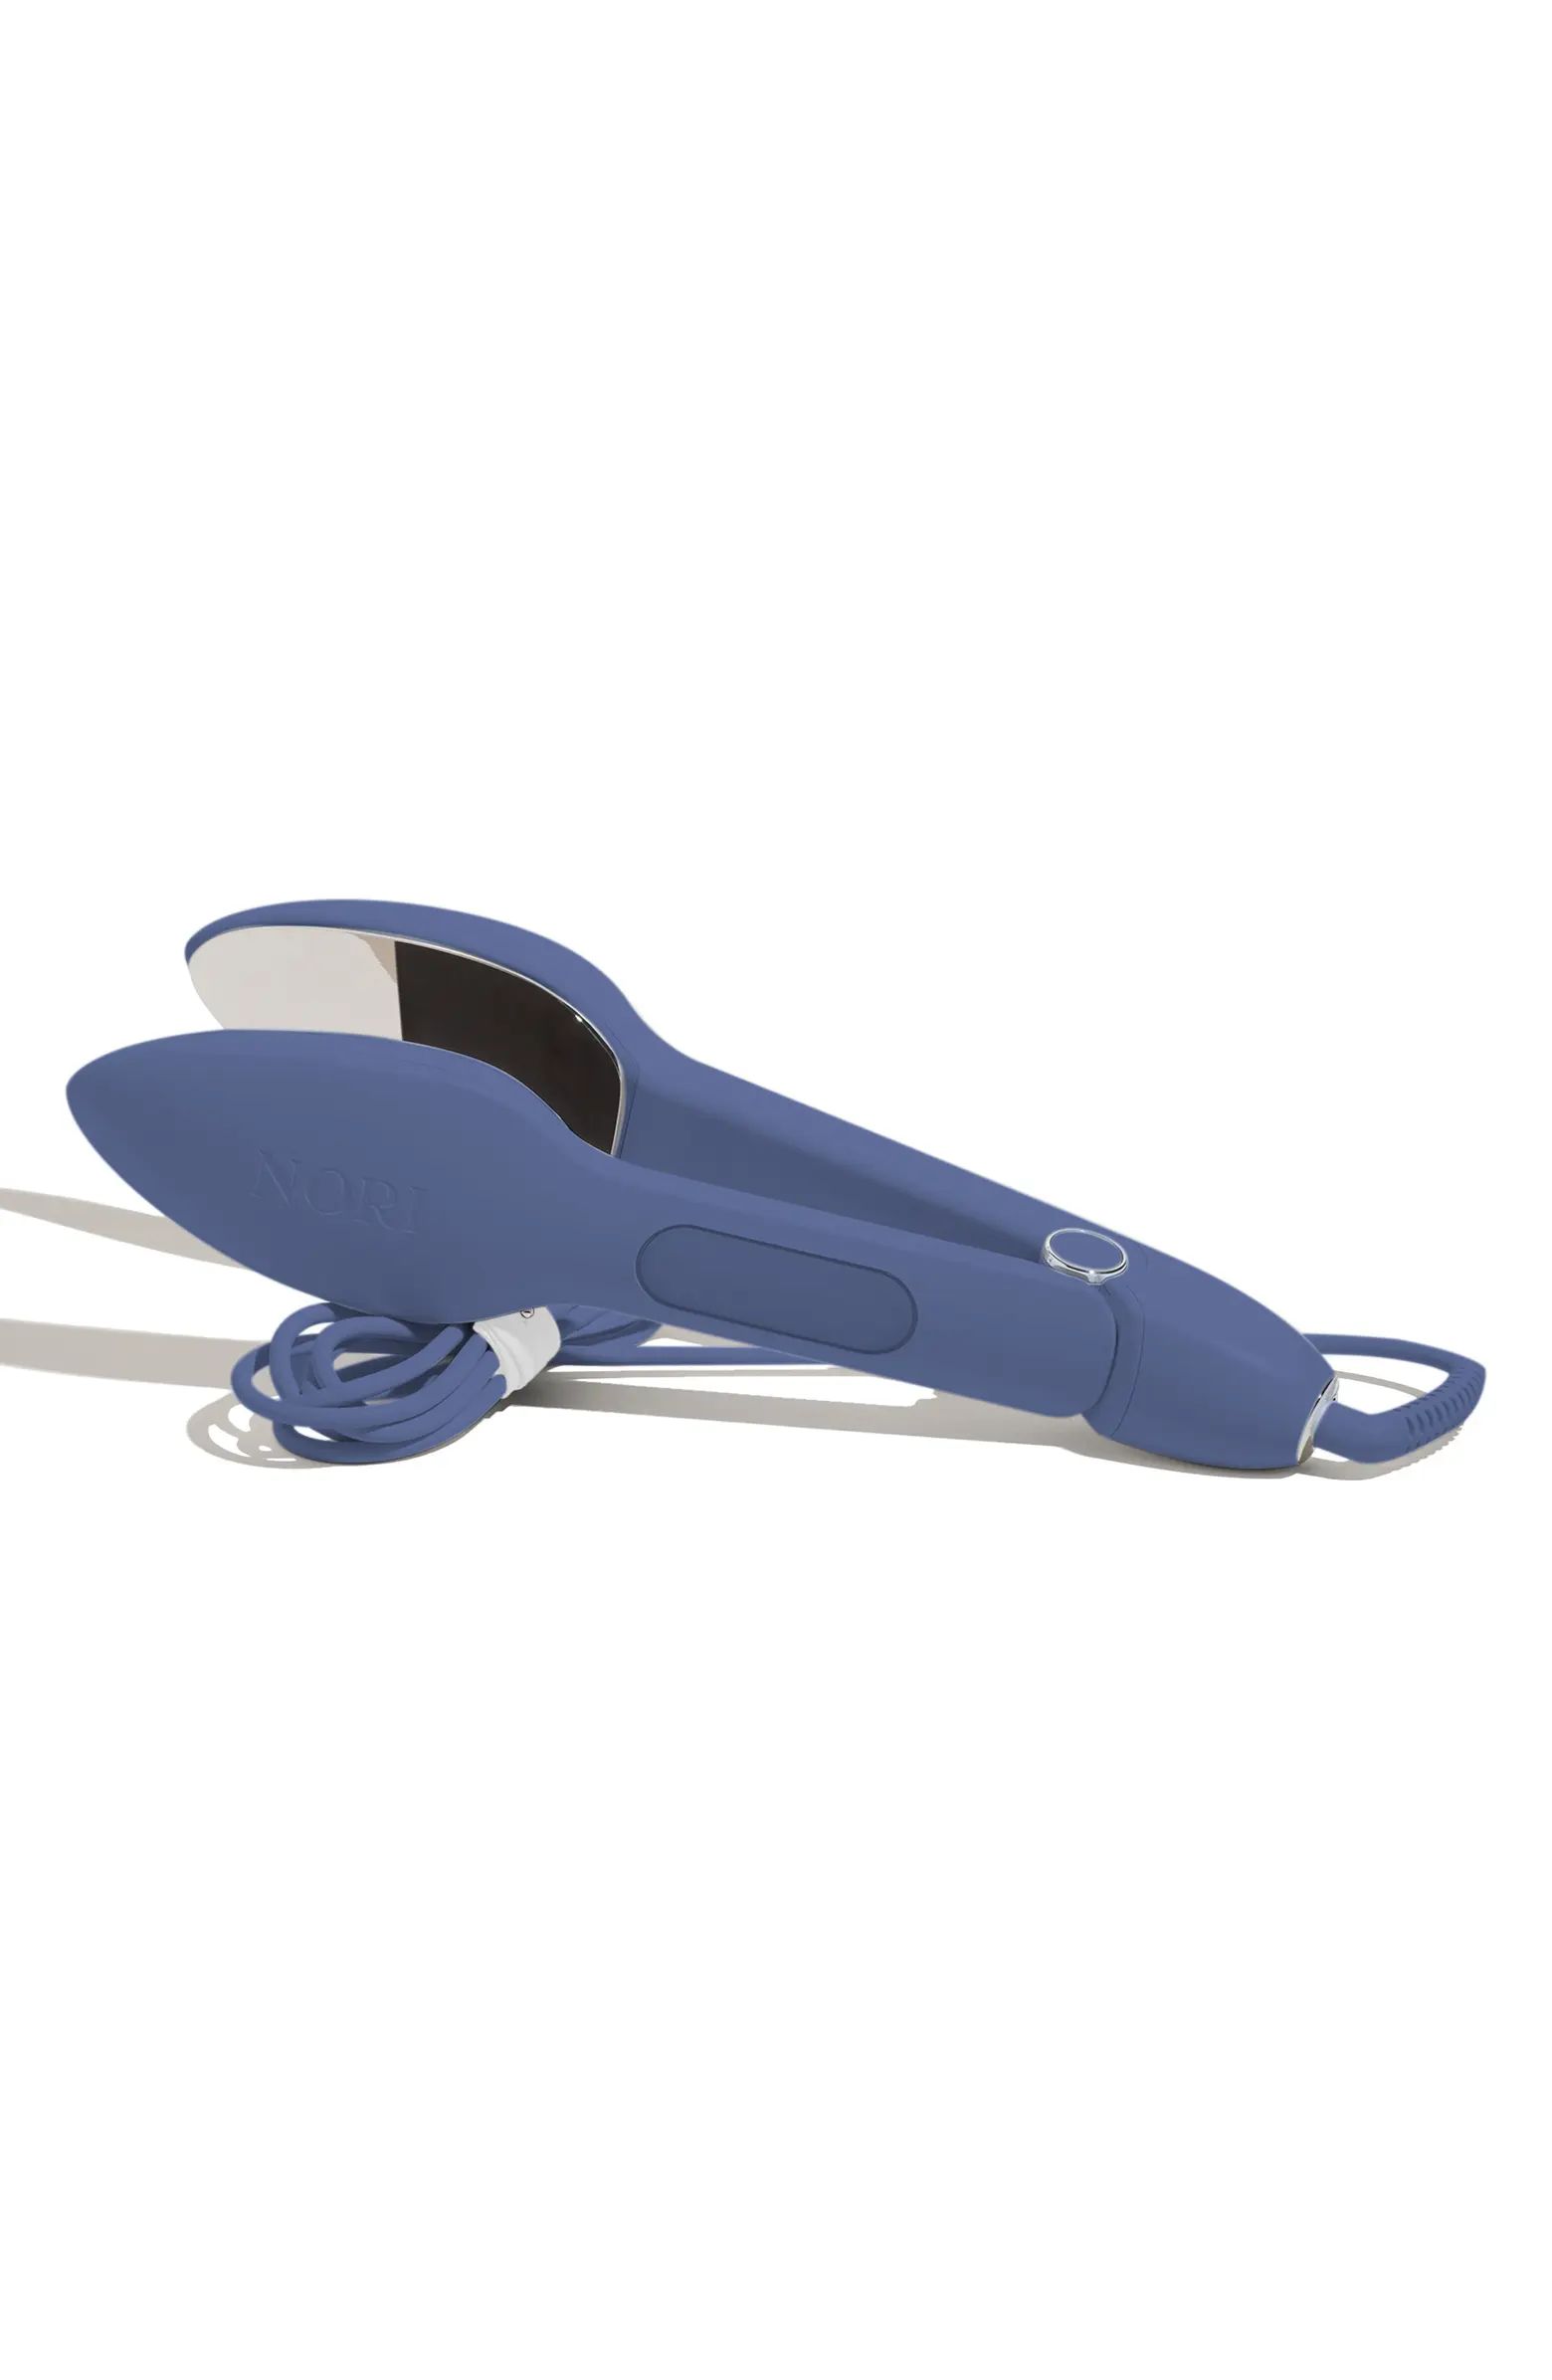 Handheld Steamer and Iron | Nordstrom